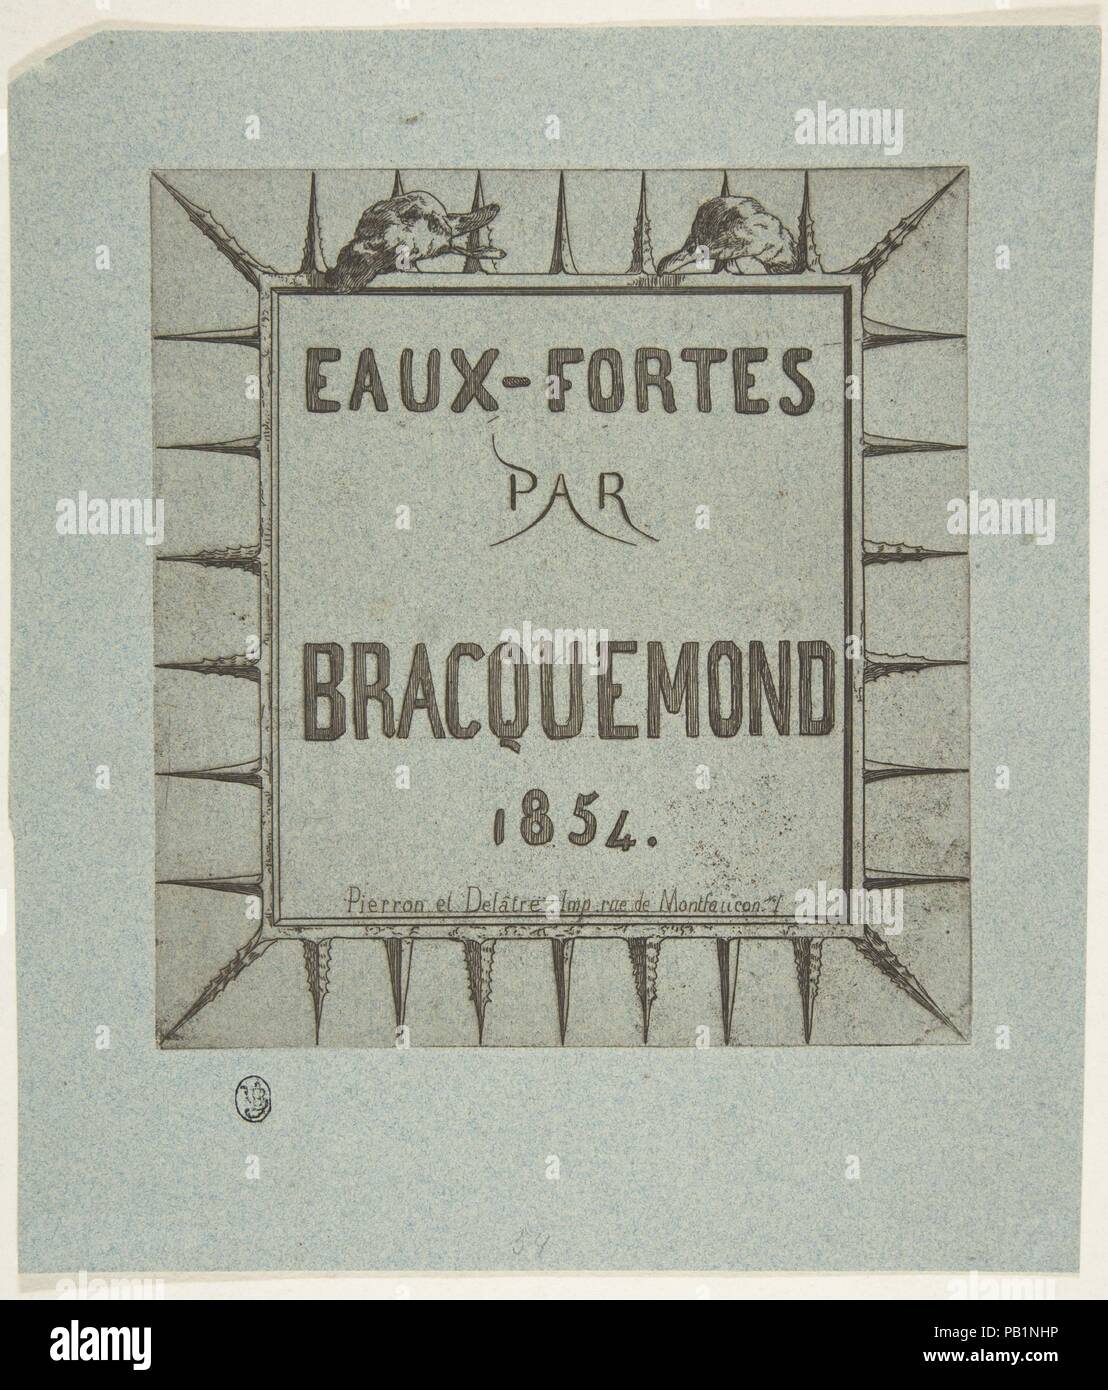 Eaux-fortes par Bracquemond. Artist: Félix Bracquemond (French, Paris 1833-1914 Sèvres). Dimensions: Sheet: 8 13/16 × 7 9/16 in. (22.4 × 19.2 cm)  Plate: 6 1/4 × 5 13/16 in. (15.8 × 14.8 cm). Printer: Pierron et Delâtre (French). Date: 1854.  The etchers who produced albums with Cadart during the 1850s and 1860s favored simple designs for their title pages. For his first series, Bracquemond produced this print in which the required text is adorned only by the image of two ducks. The animals were, in fact, a trademark for Bracquemond--a favorite subject, they recurred throughout his work in the Stock Photo